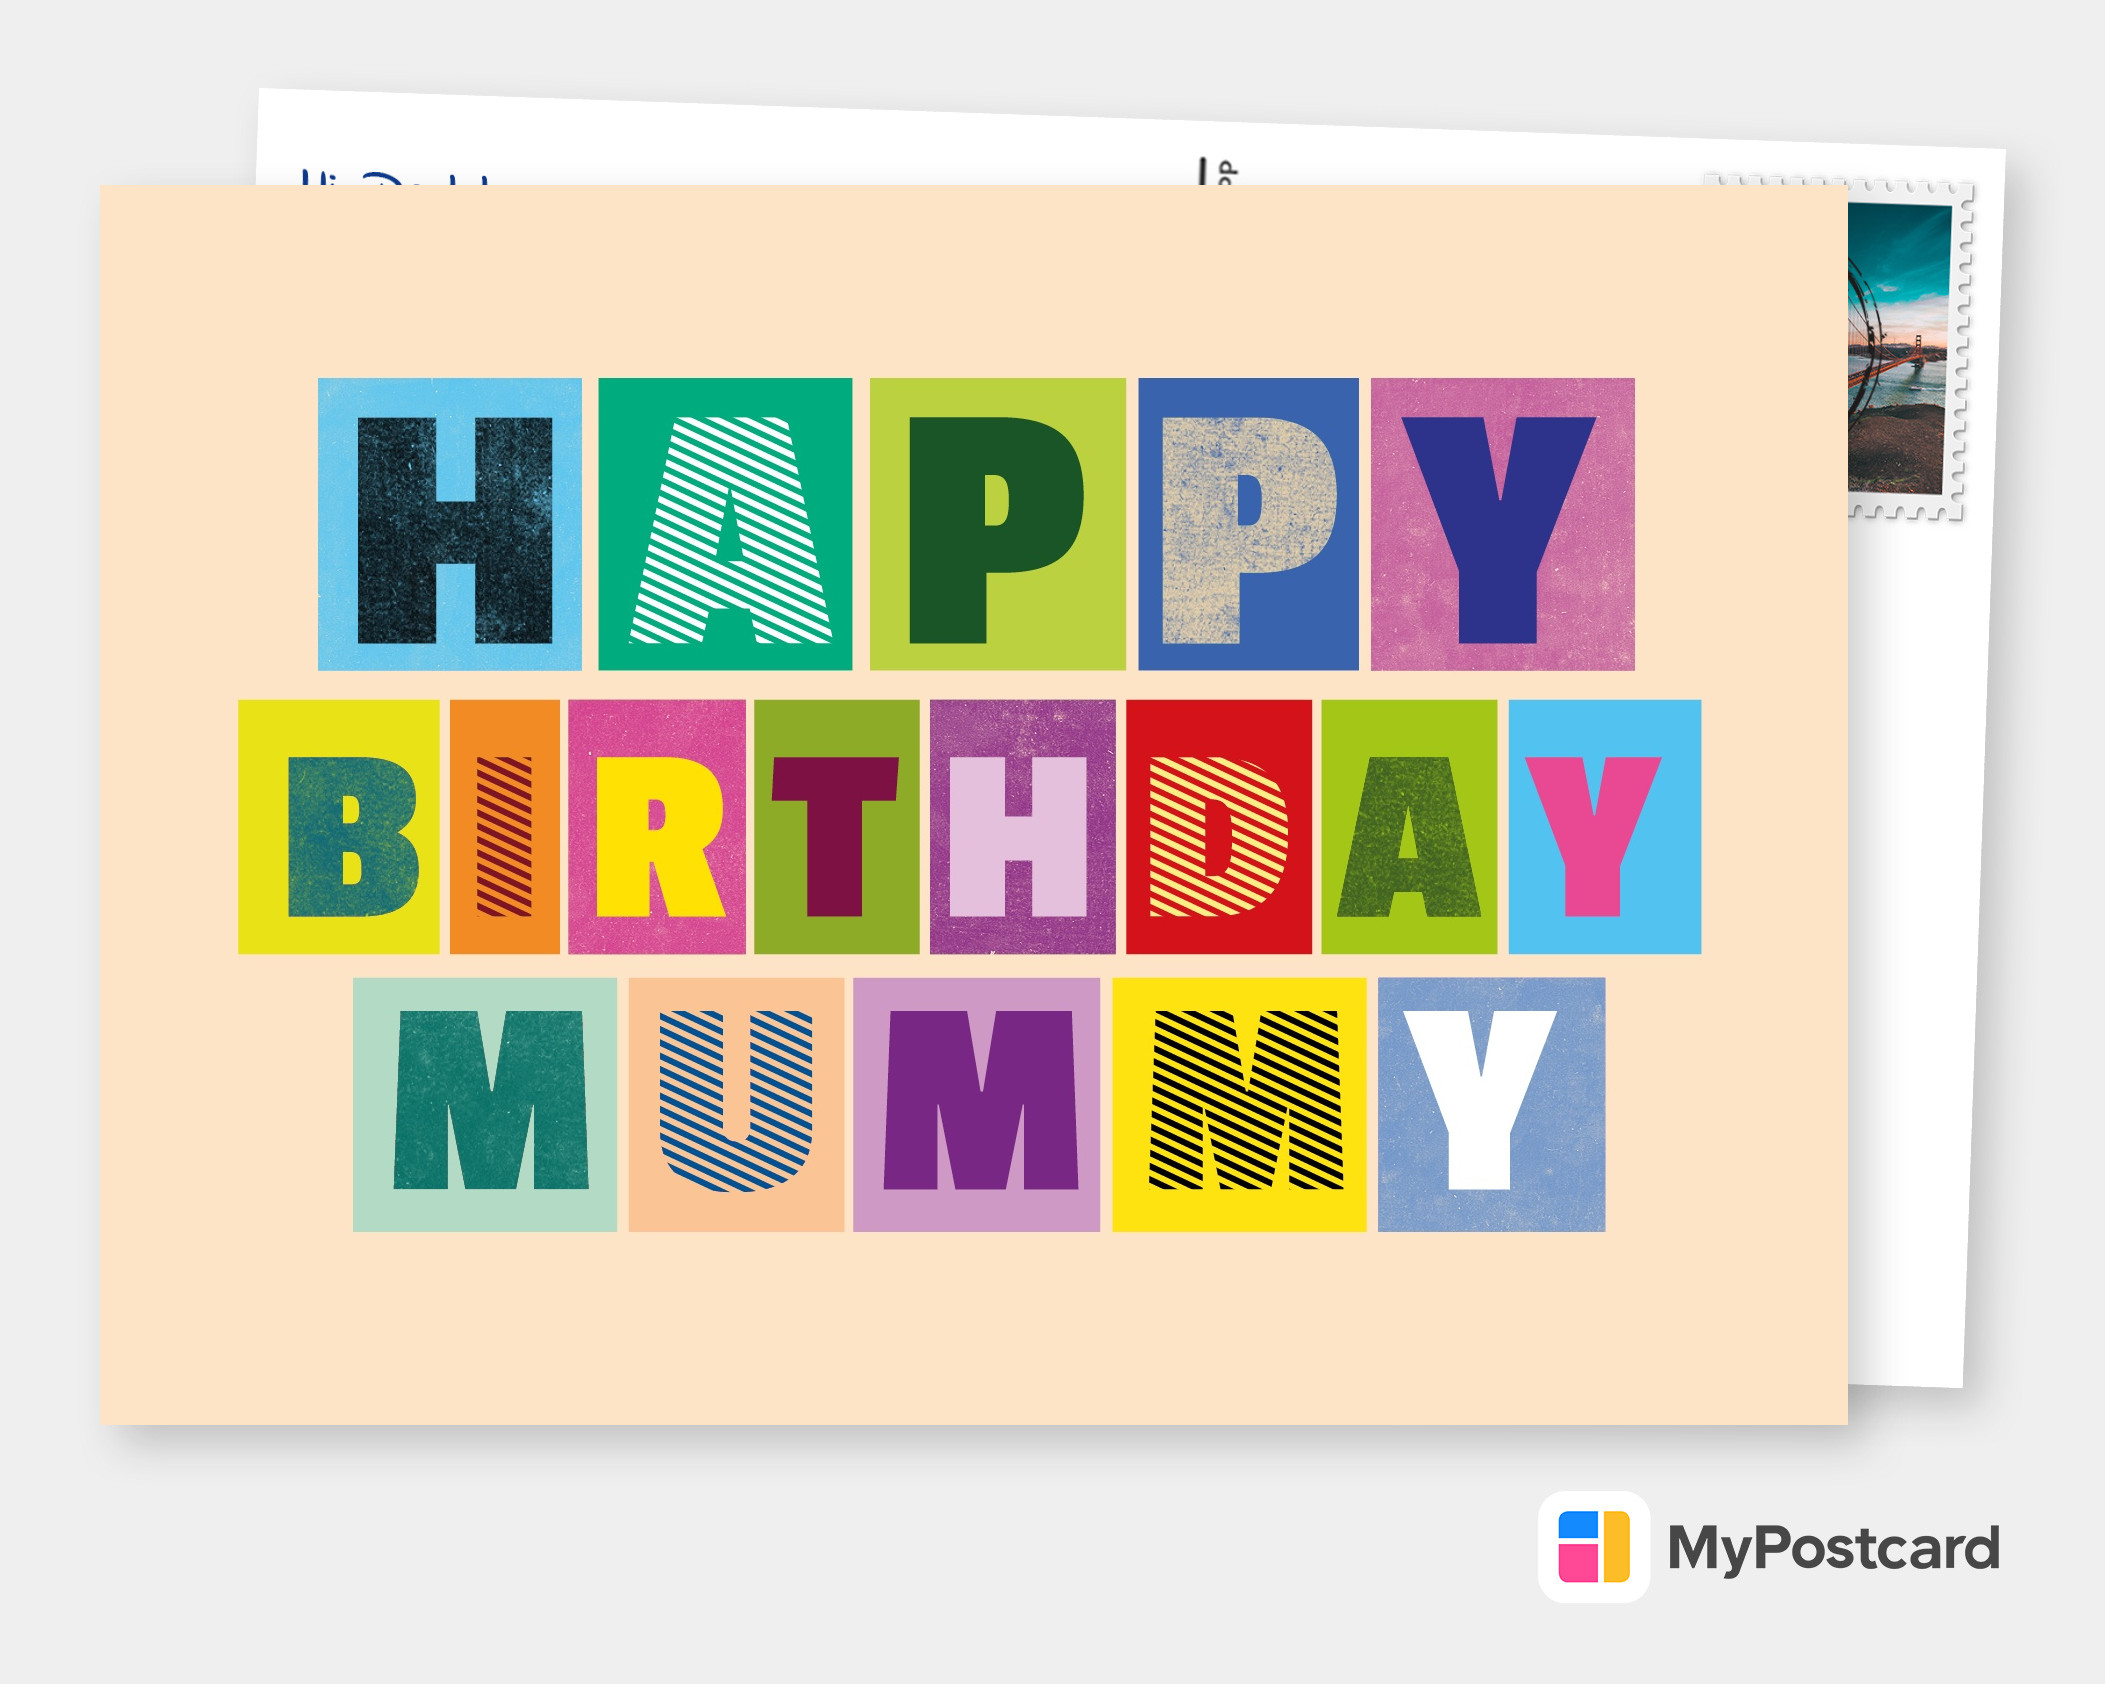 Send Happy Birthday Cards Online  Printed & Mailde For You worldwide   Personalized, Custom Happy Birthday Cards printed.